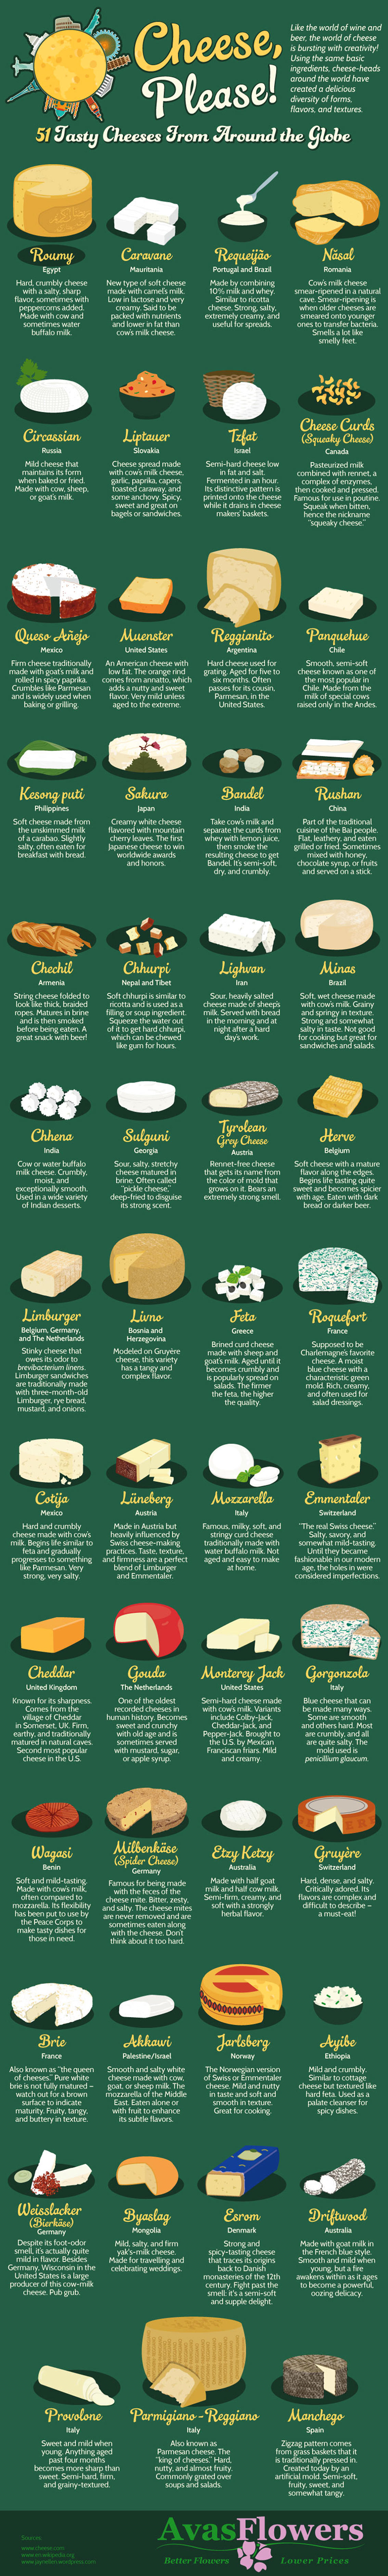 51 Tasty Cheeses from Around the World Infographic